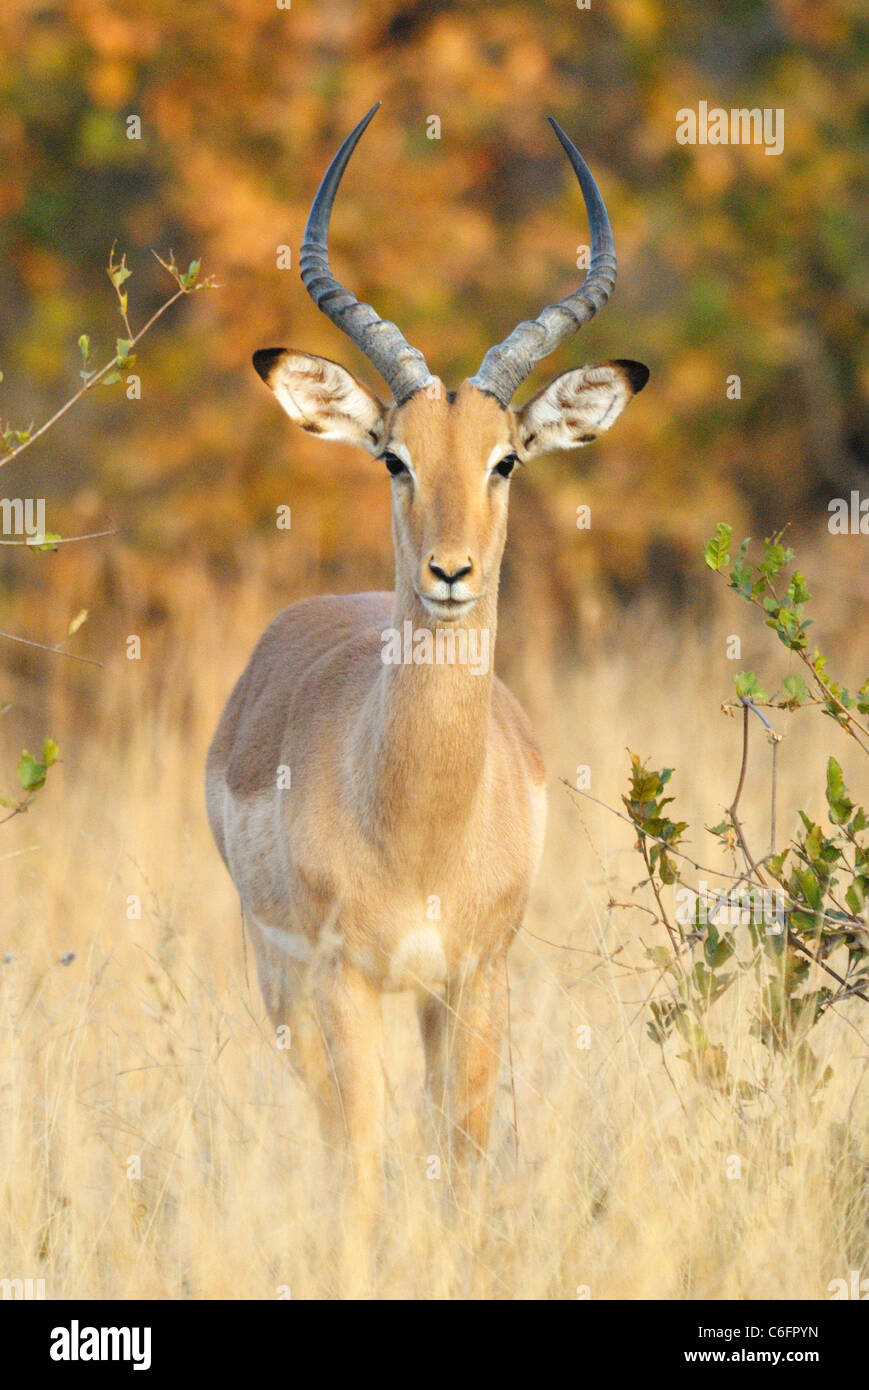 Male Impala in Kruger National Park, South Africa Stock Photo